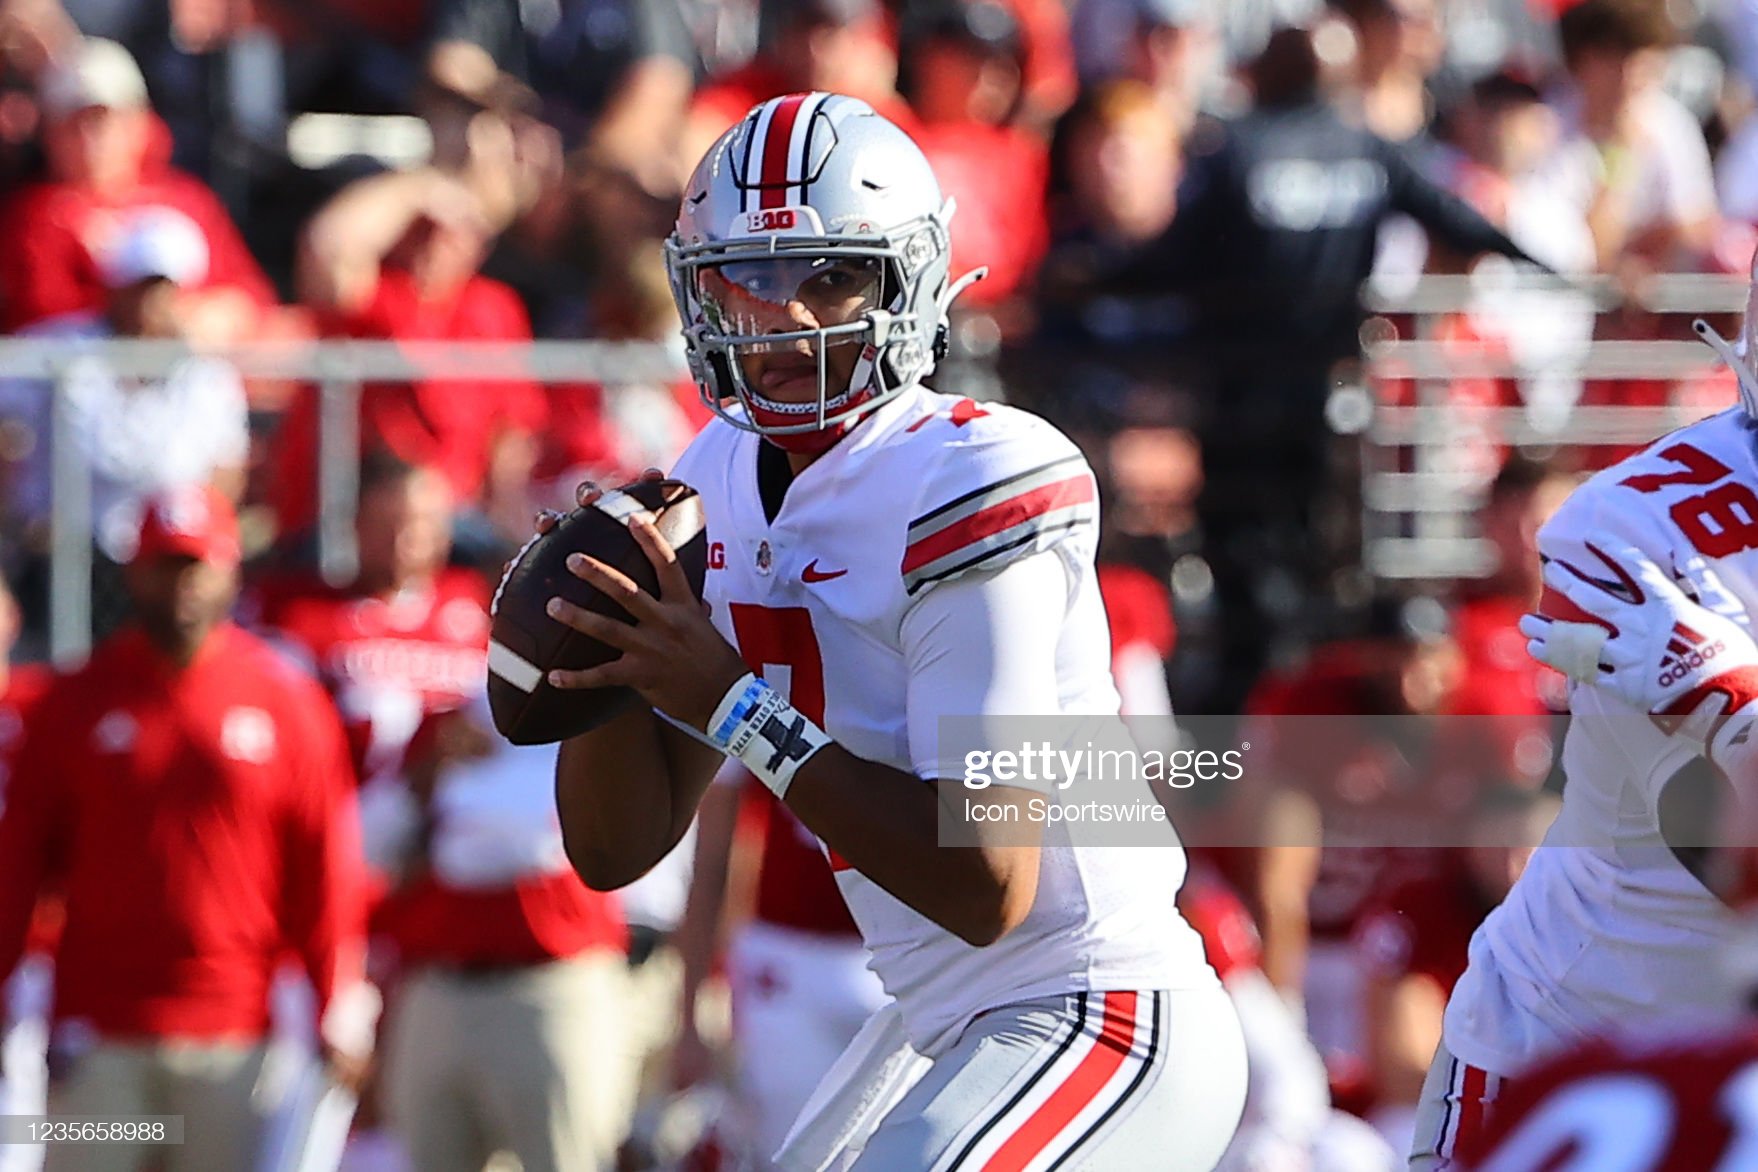 2023 NFL Draft Scouting Notes: QB CJ Stroud, Ohio State